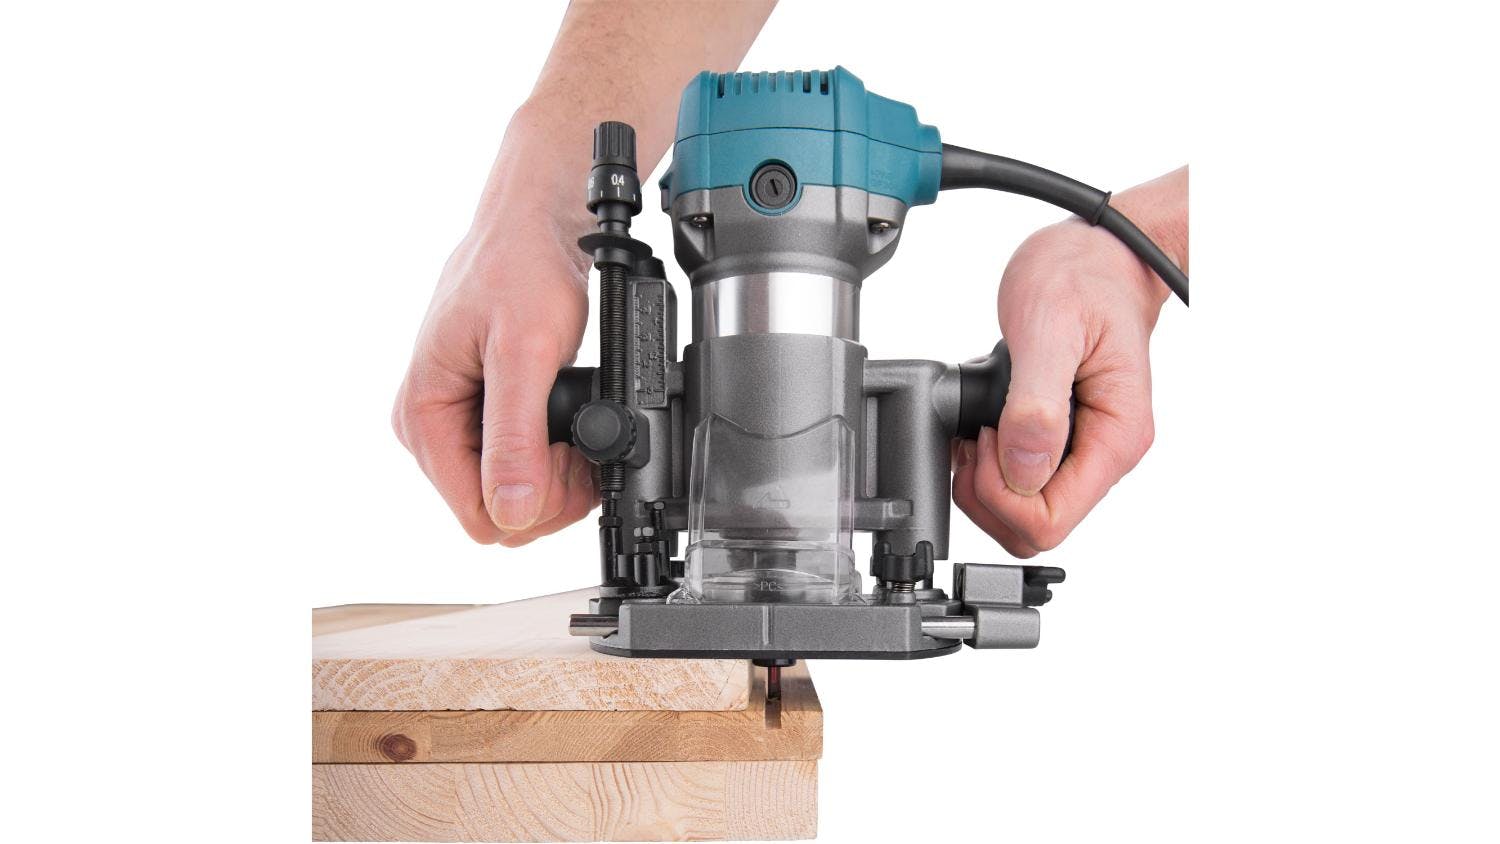 Extol Industrial Multifunction Wood Router 710W